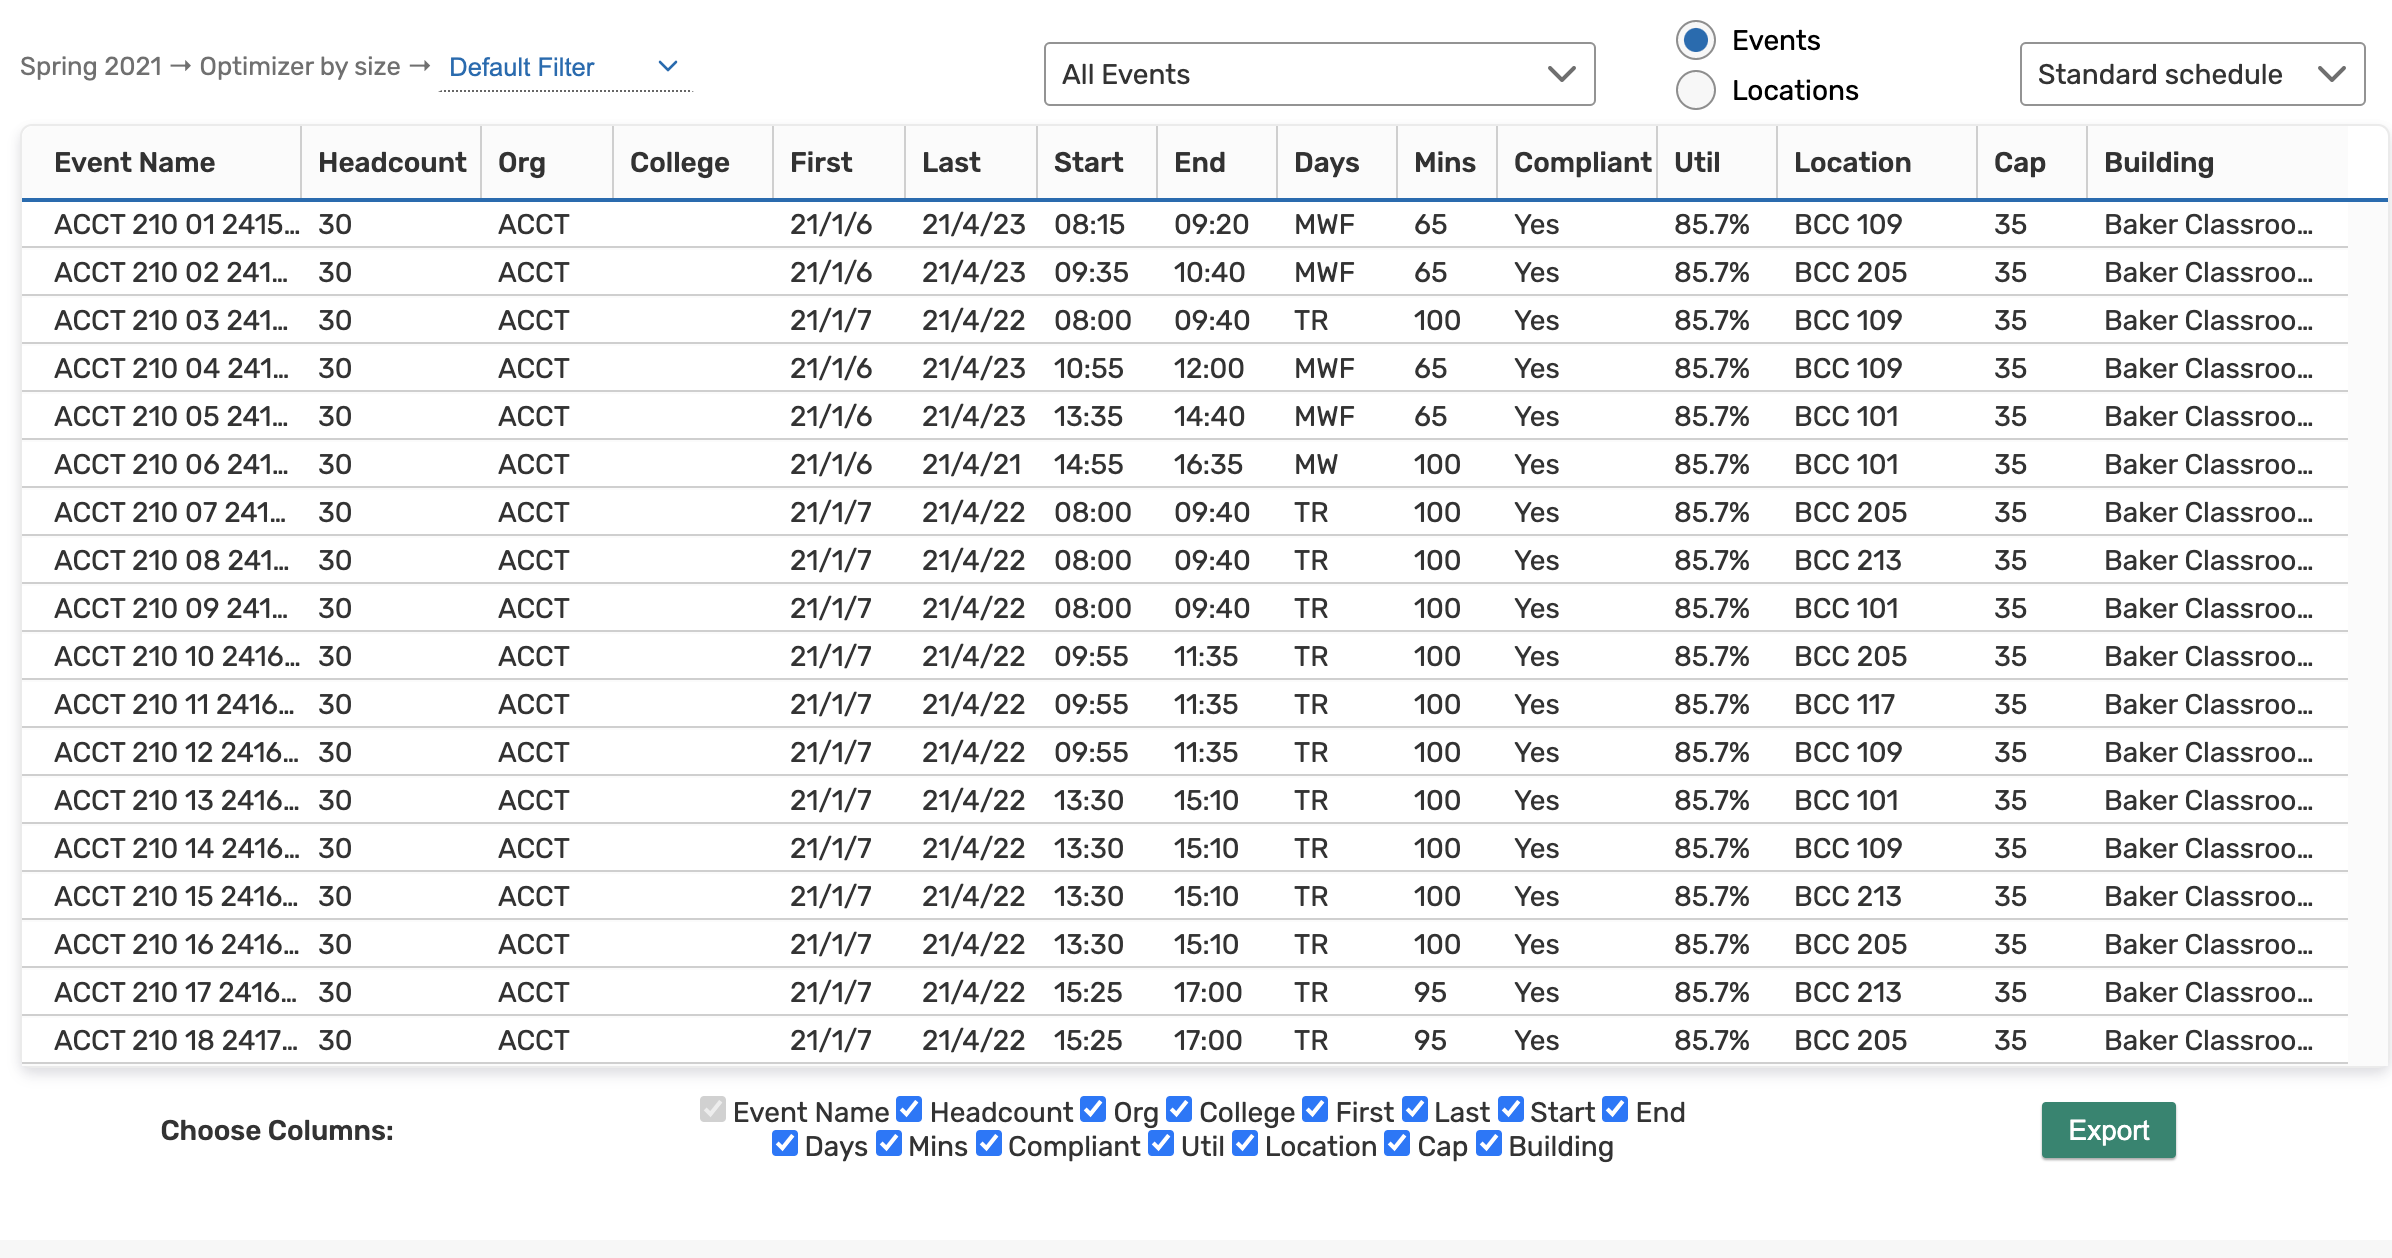 A table of data showing all events in a snapshot. There are drop-down menus with filtering and grouping options.